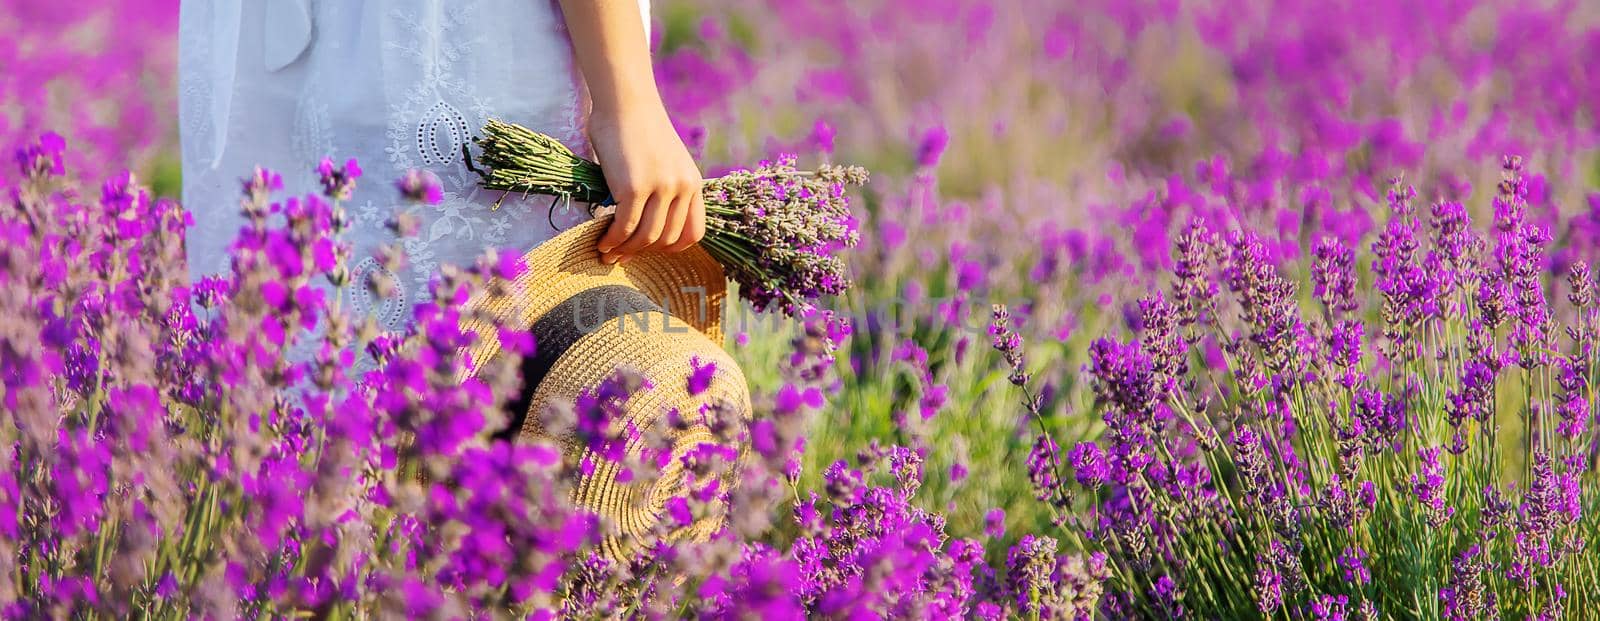 A child in a lavender field. Selective focus. by yanadjana